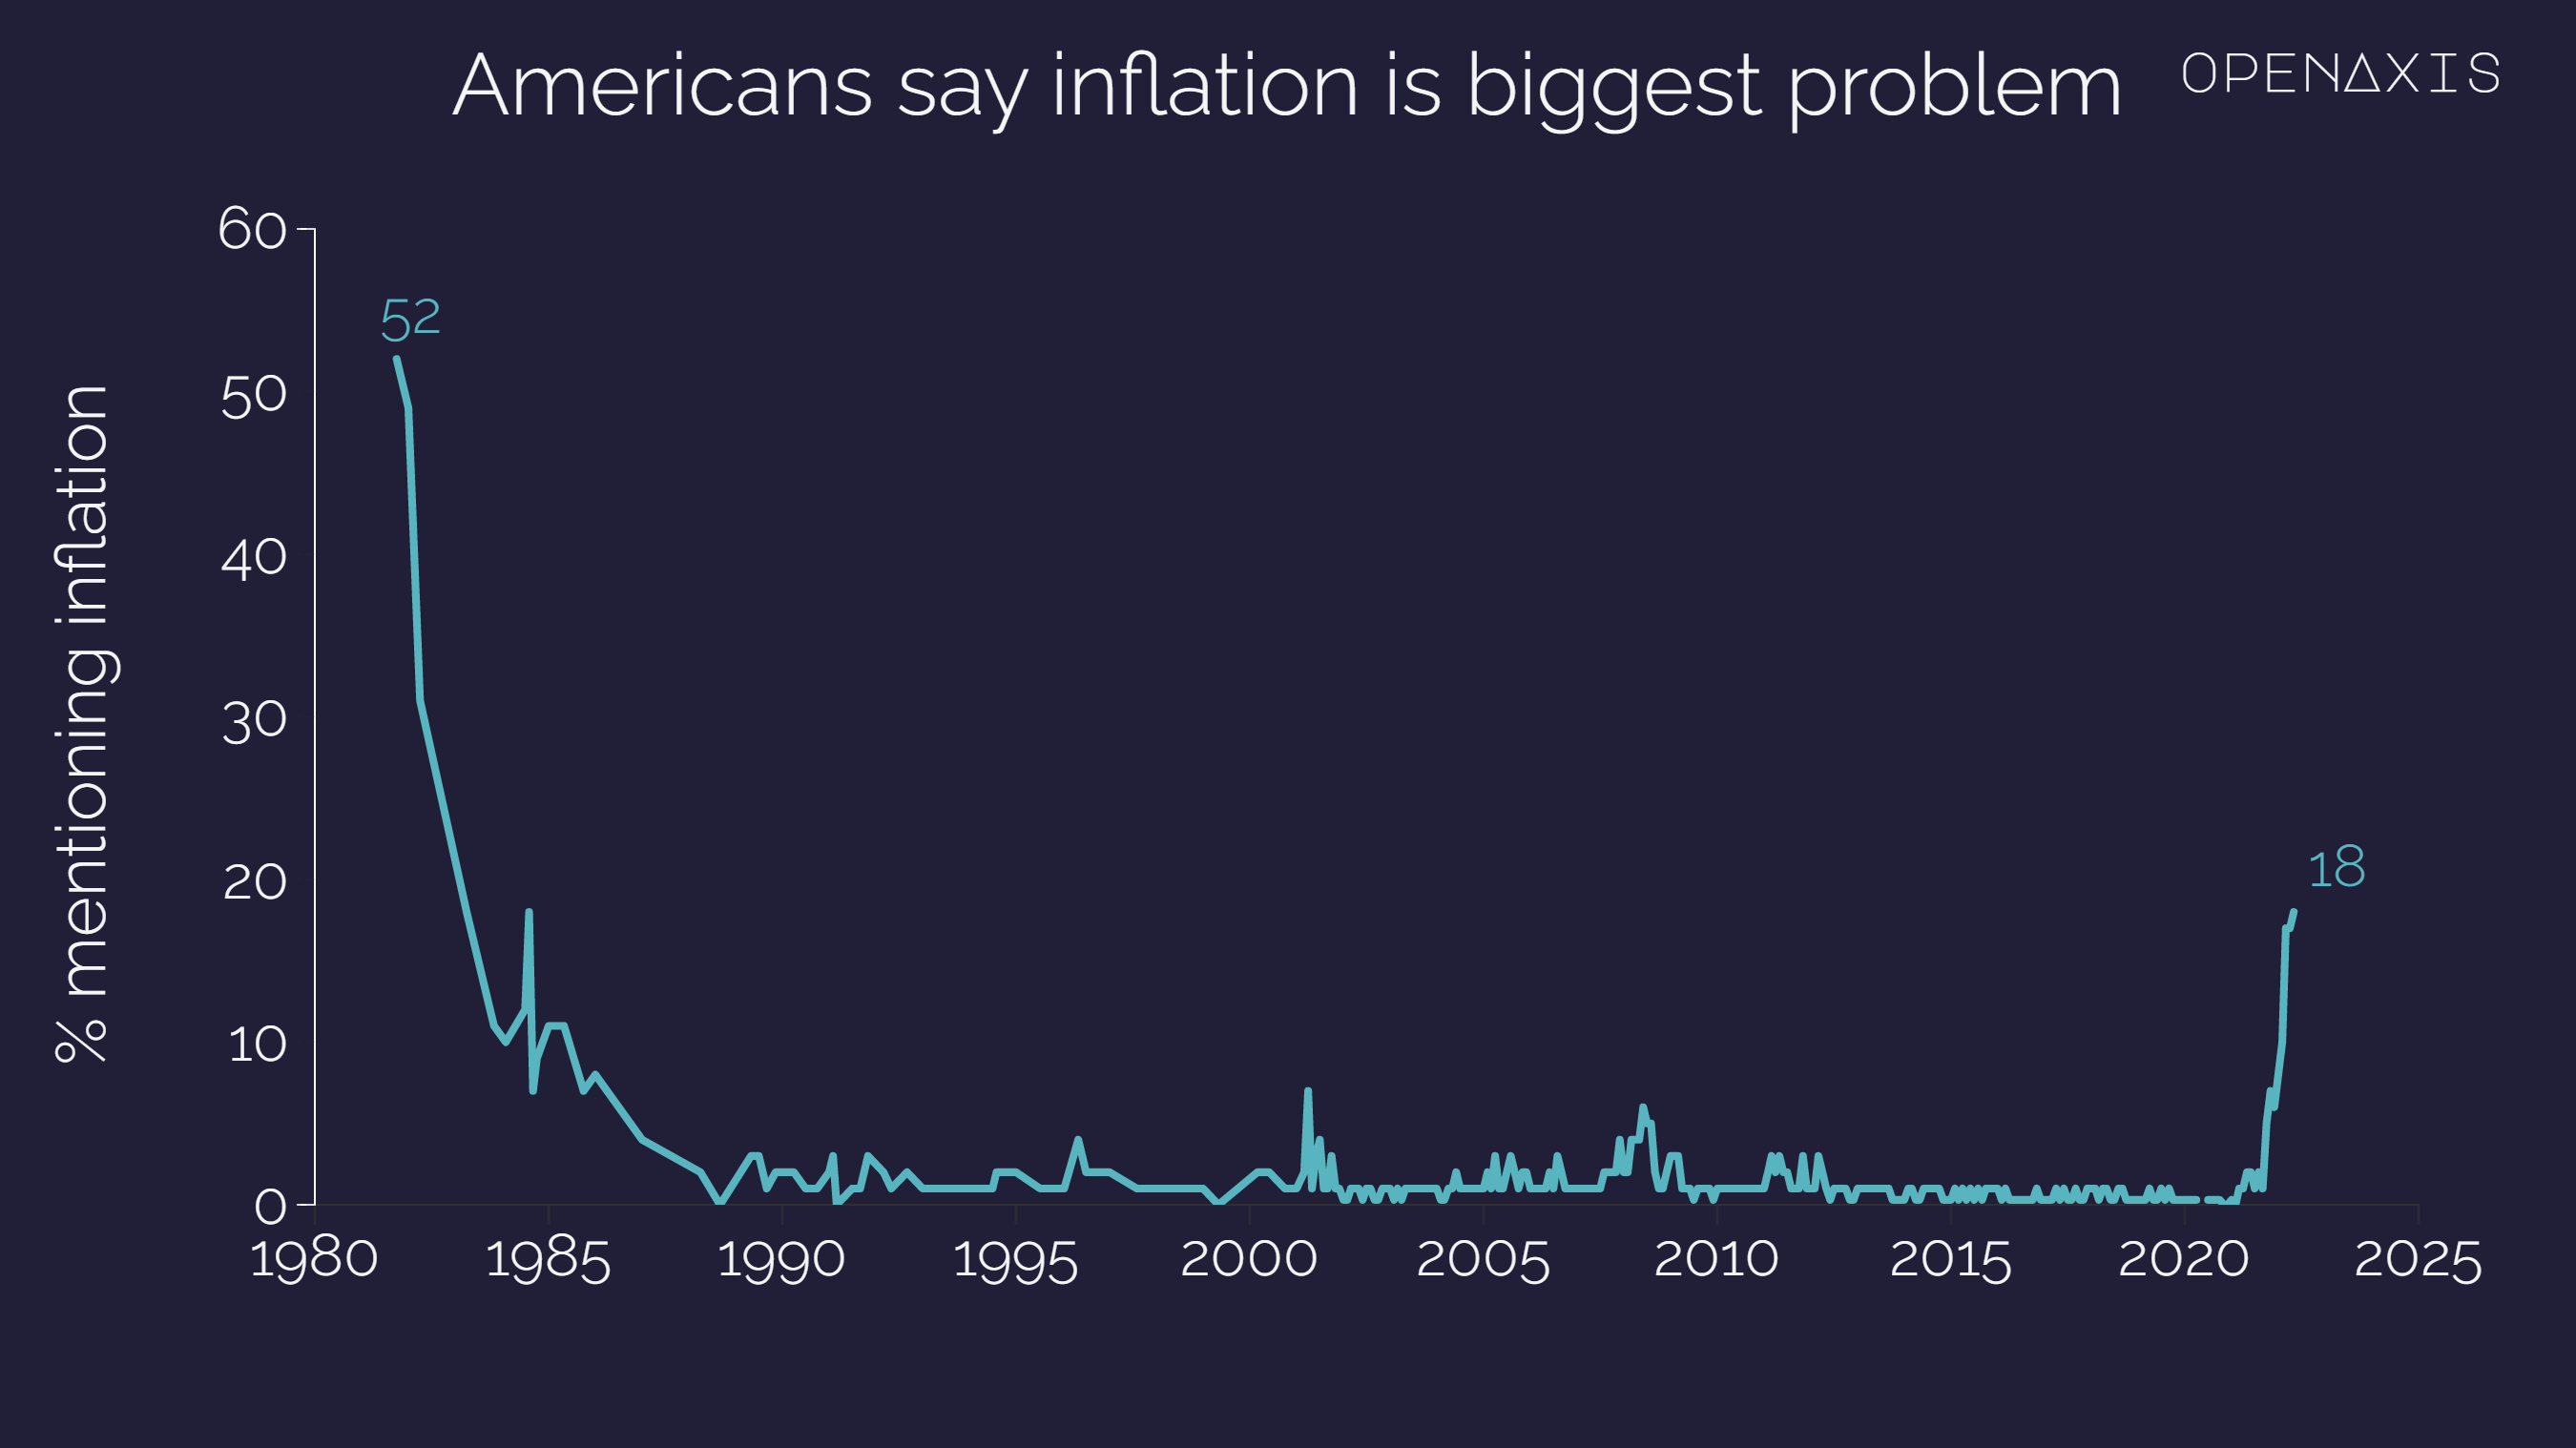 "Americans say inflation is biggest problem"